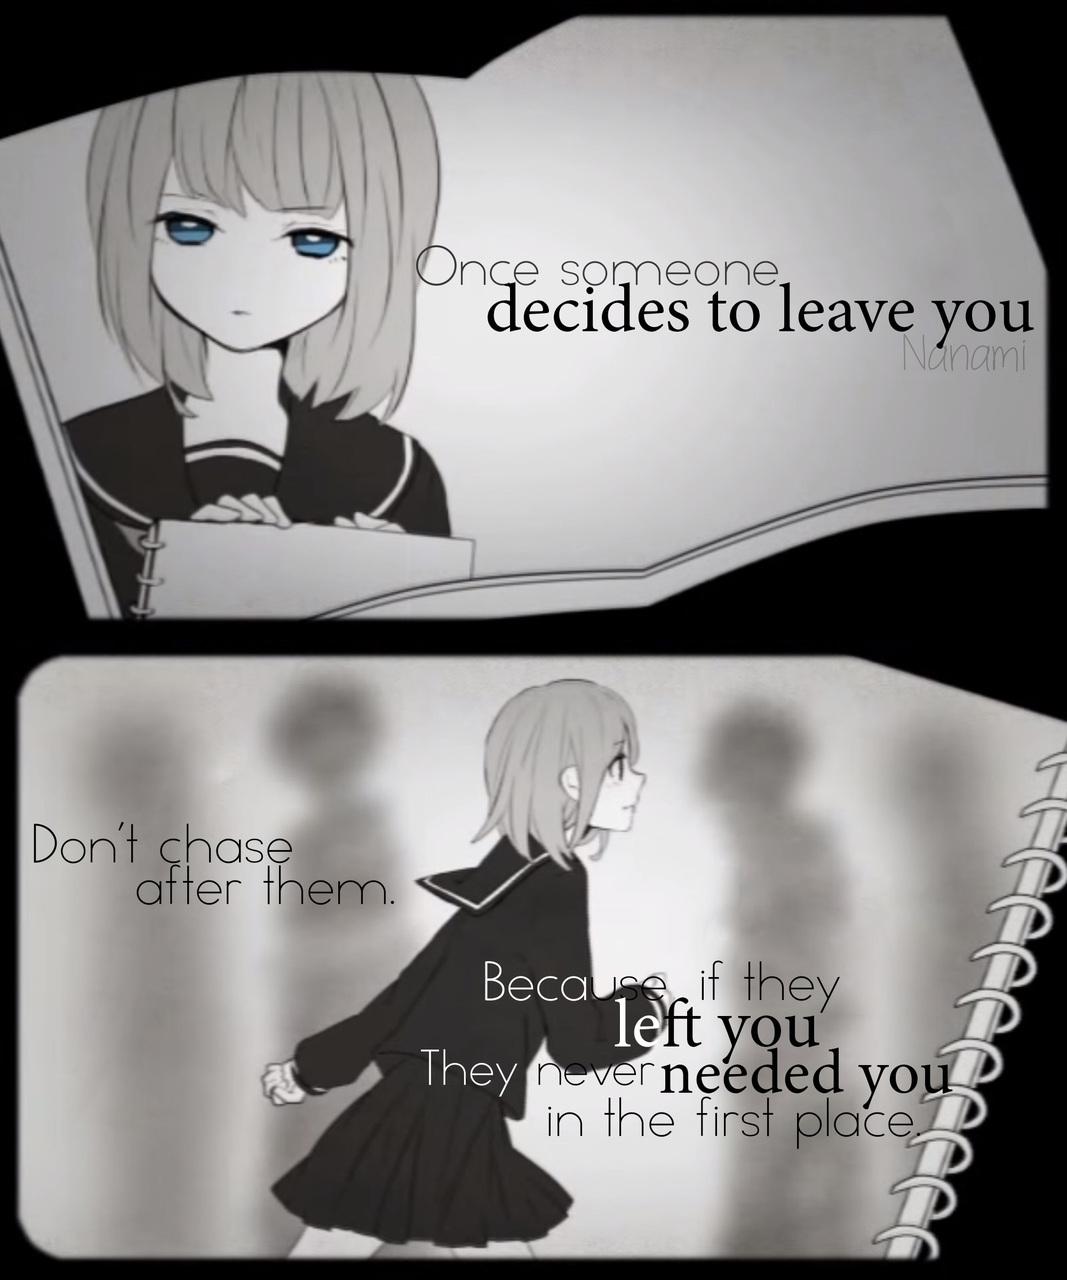 Sad Anime Wallpapers With Quotes - Sad Anime Quotes Wallpapers - Top